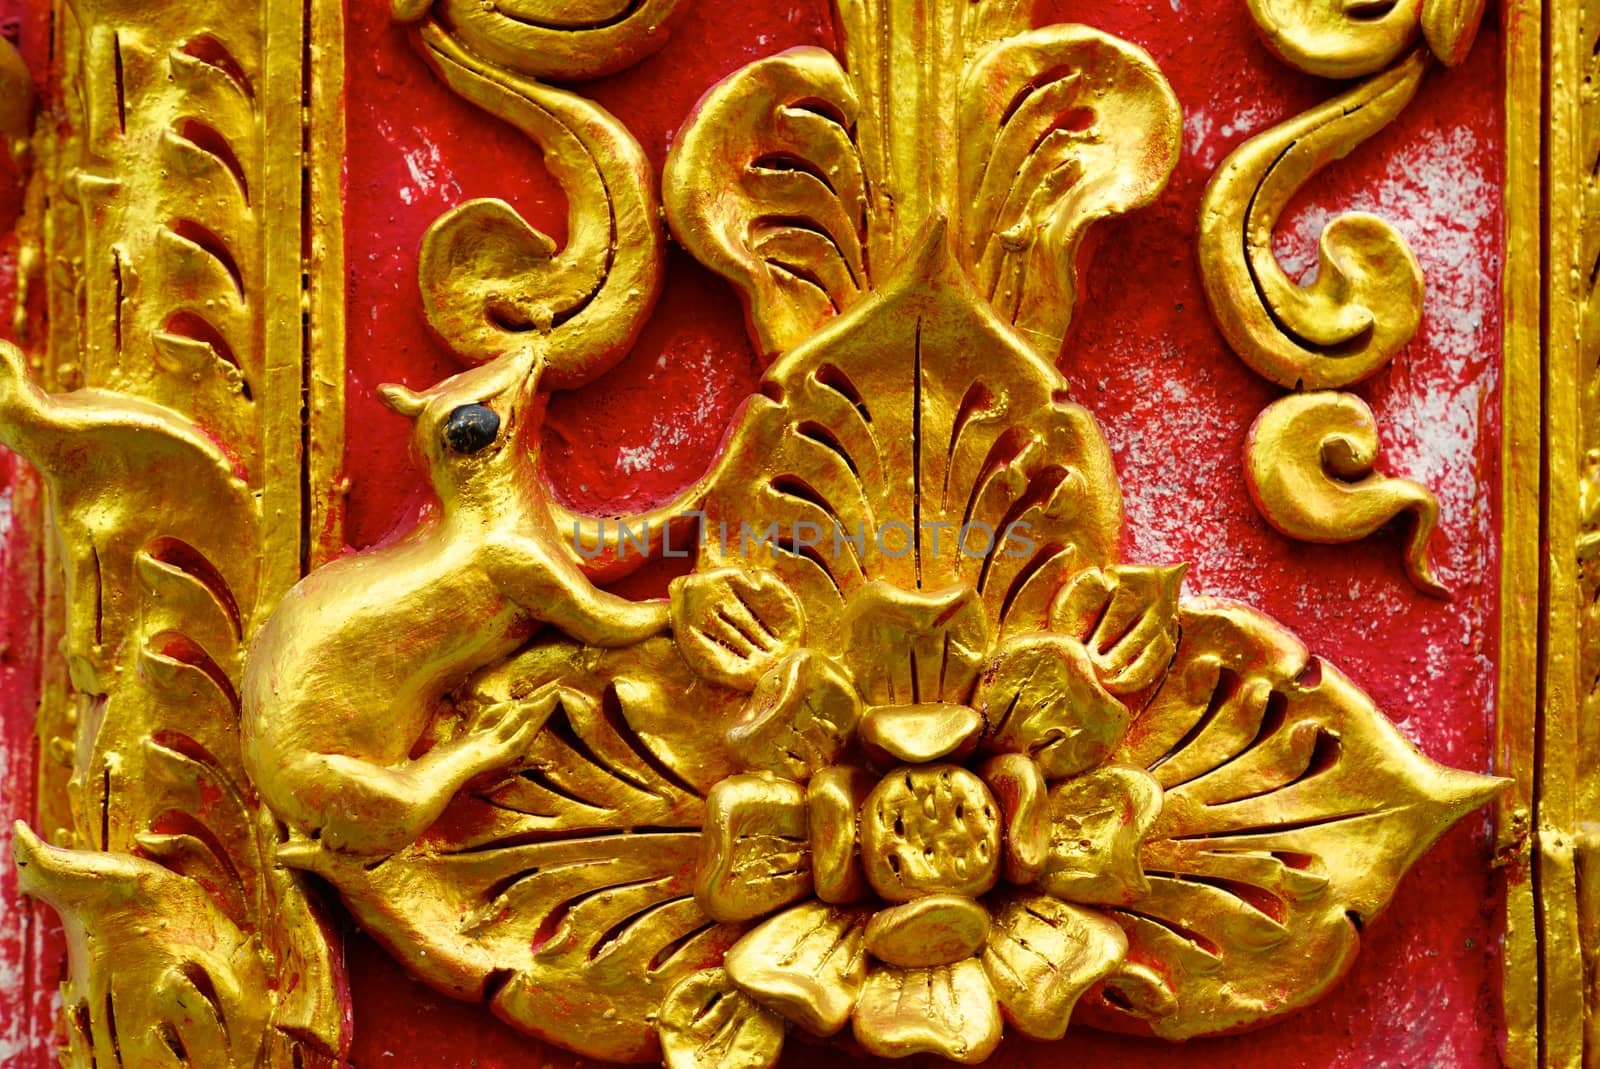  stucco work showing of traditional thai pattern that decorated with mirror and precious stone,Lampang temple,Thailand